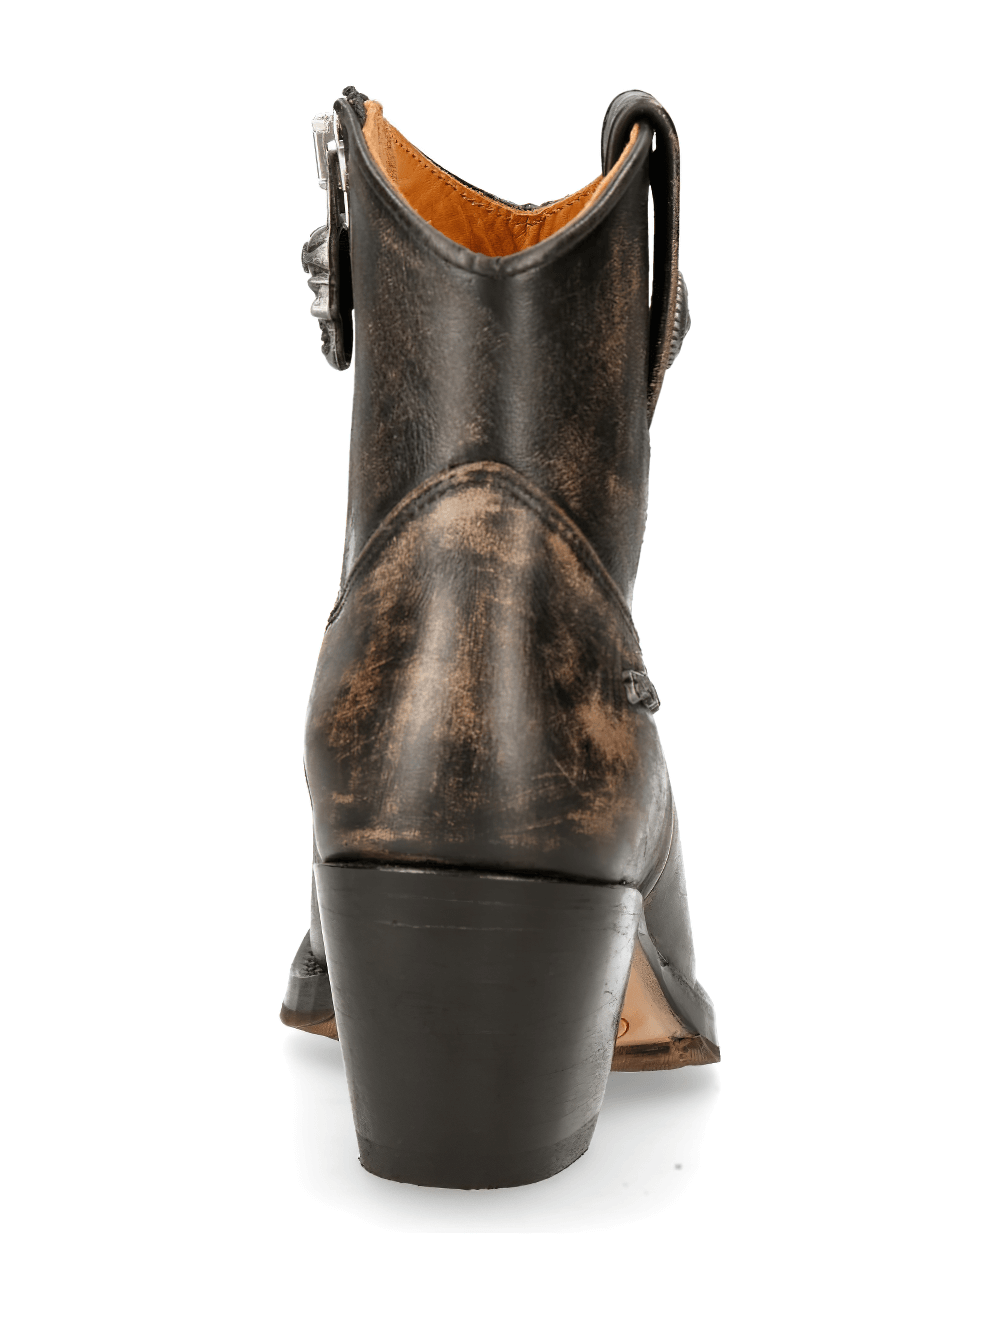 NEW ROCK Distressed Leather Ankle Boots with Zipper